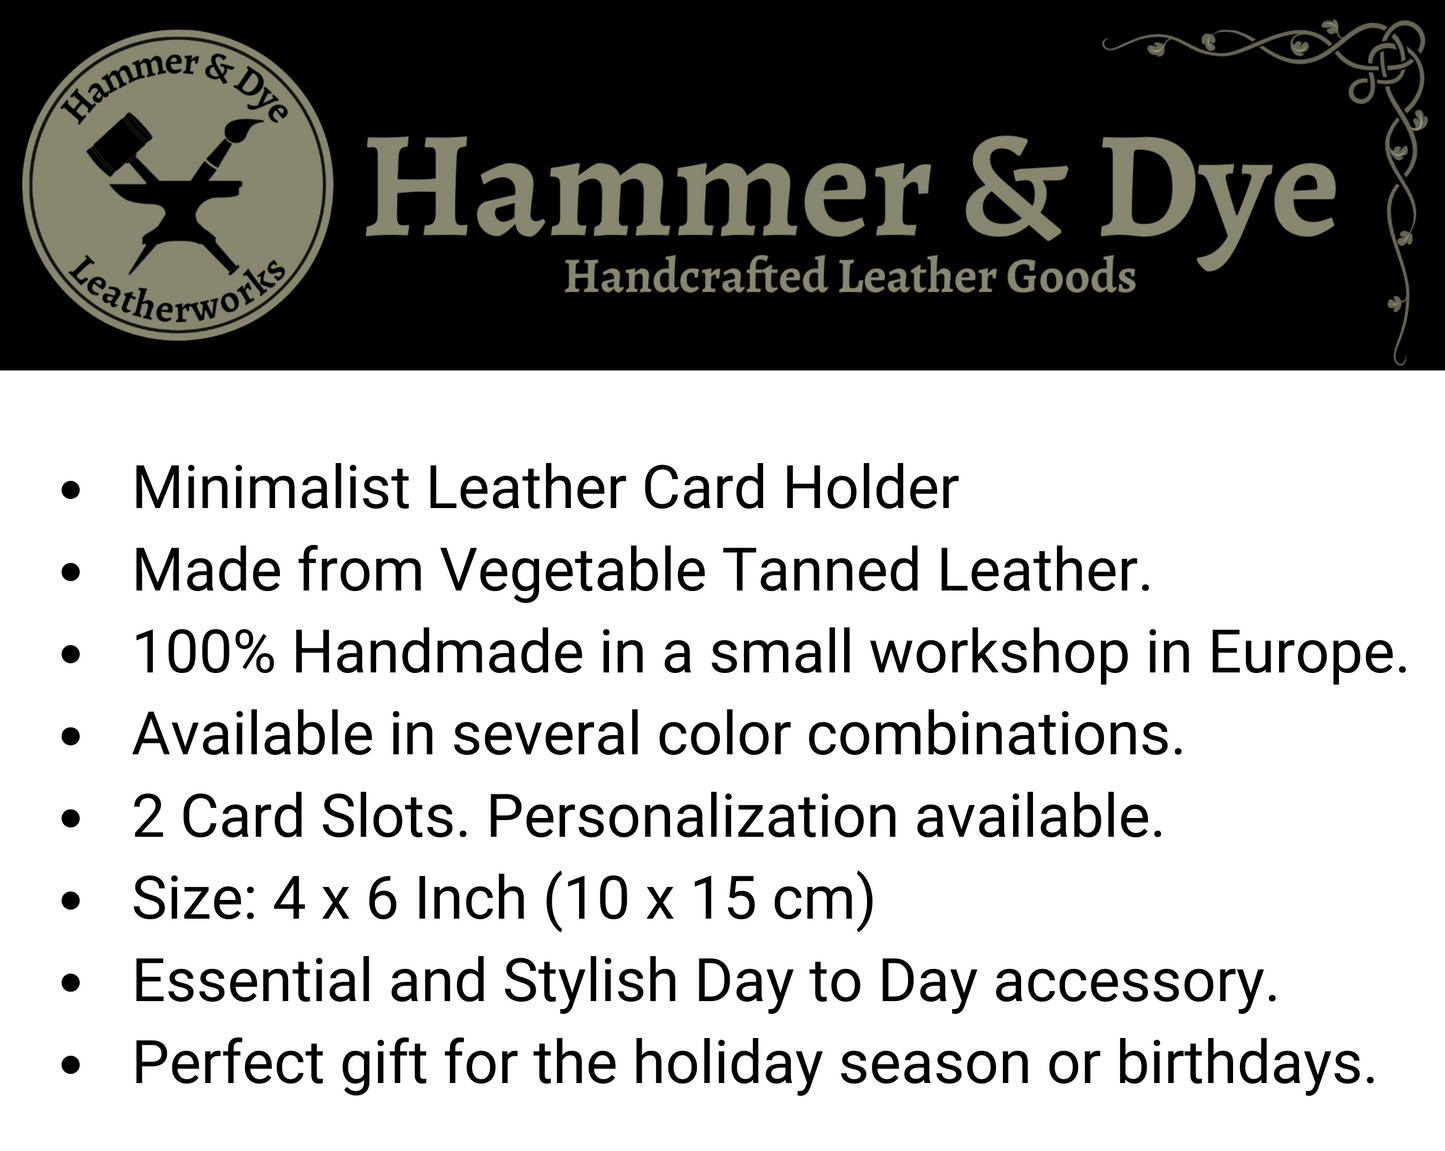 infographic with details about the Handmade Brown Bifold Leather Card Wallet